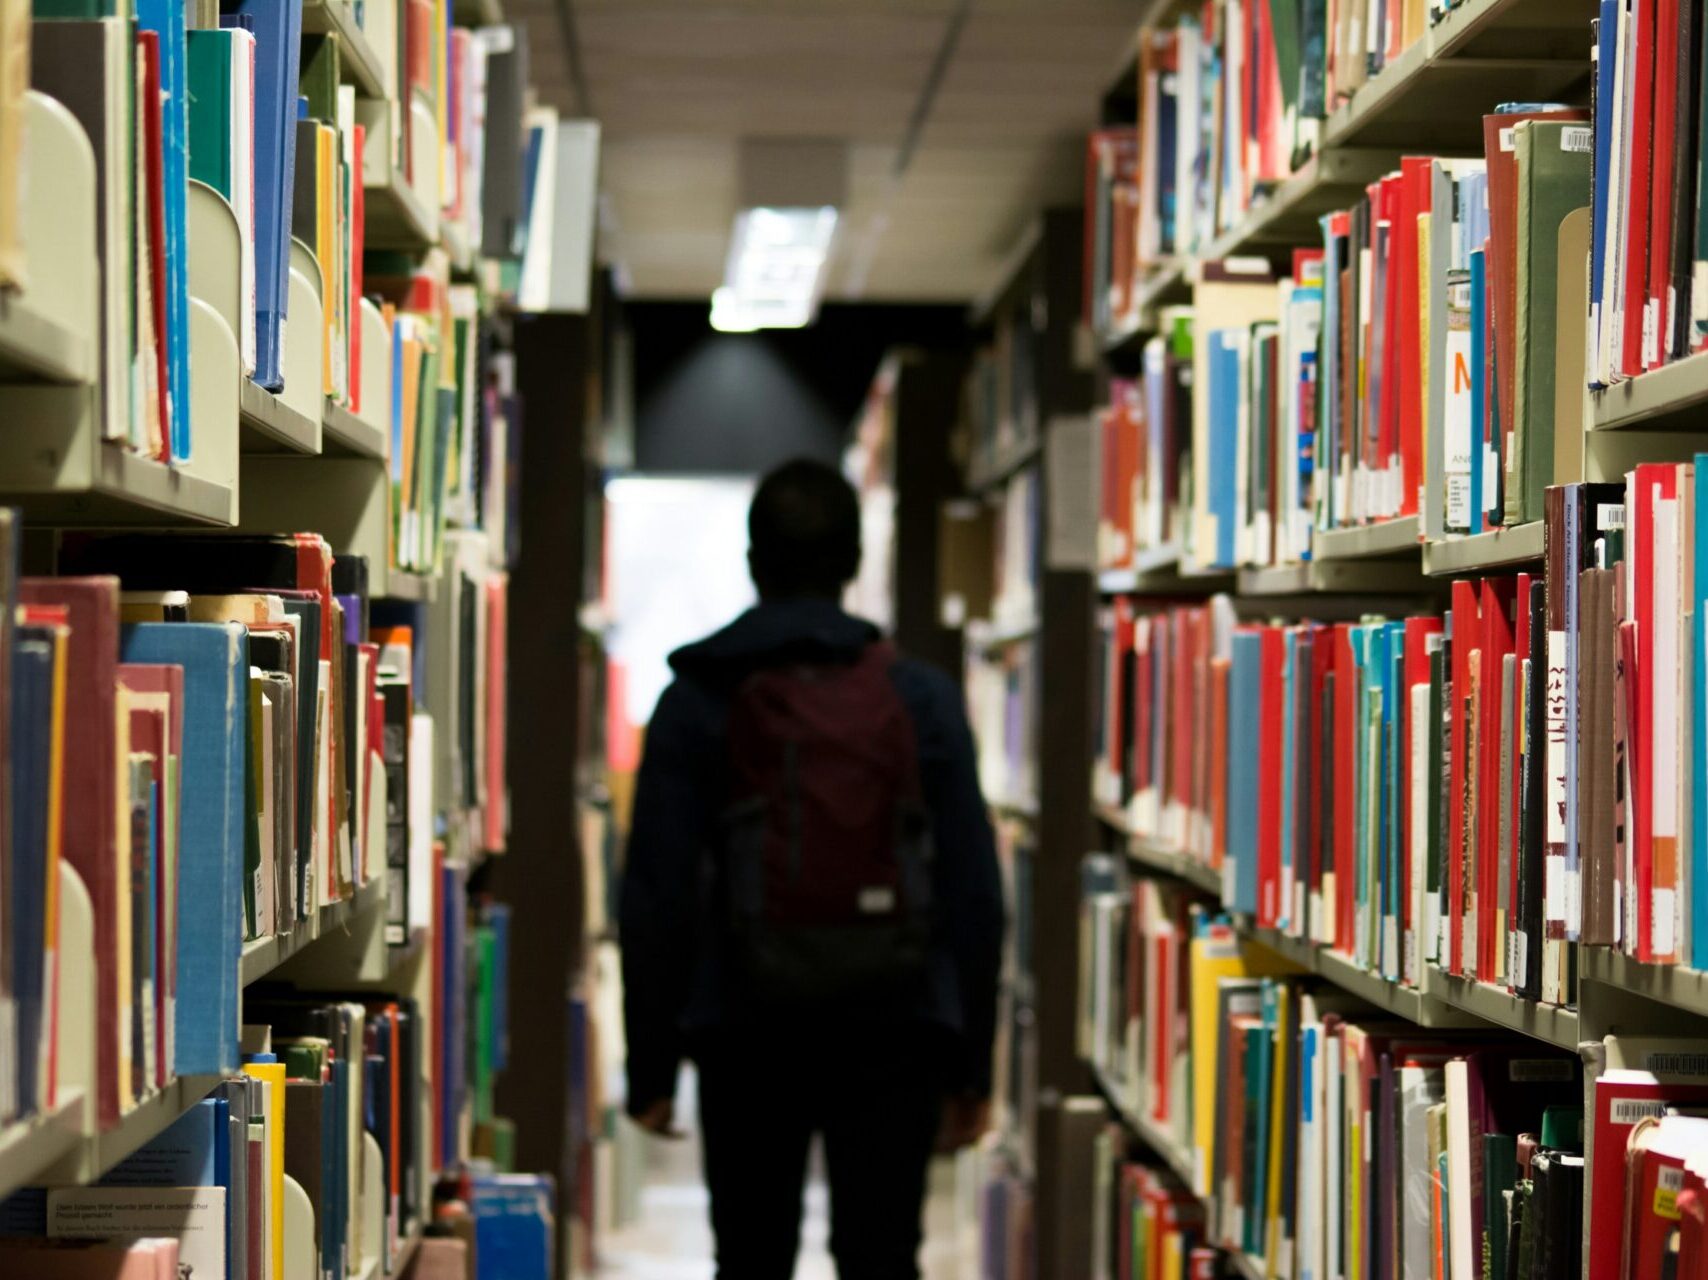 student walking through library with bookshelves on the right and left